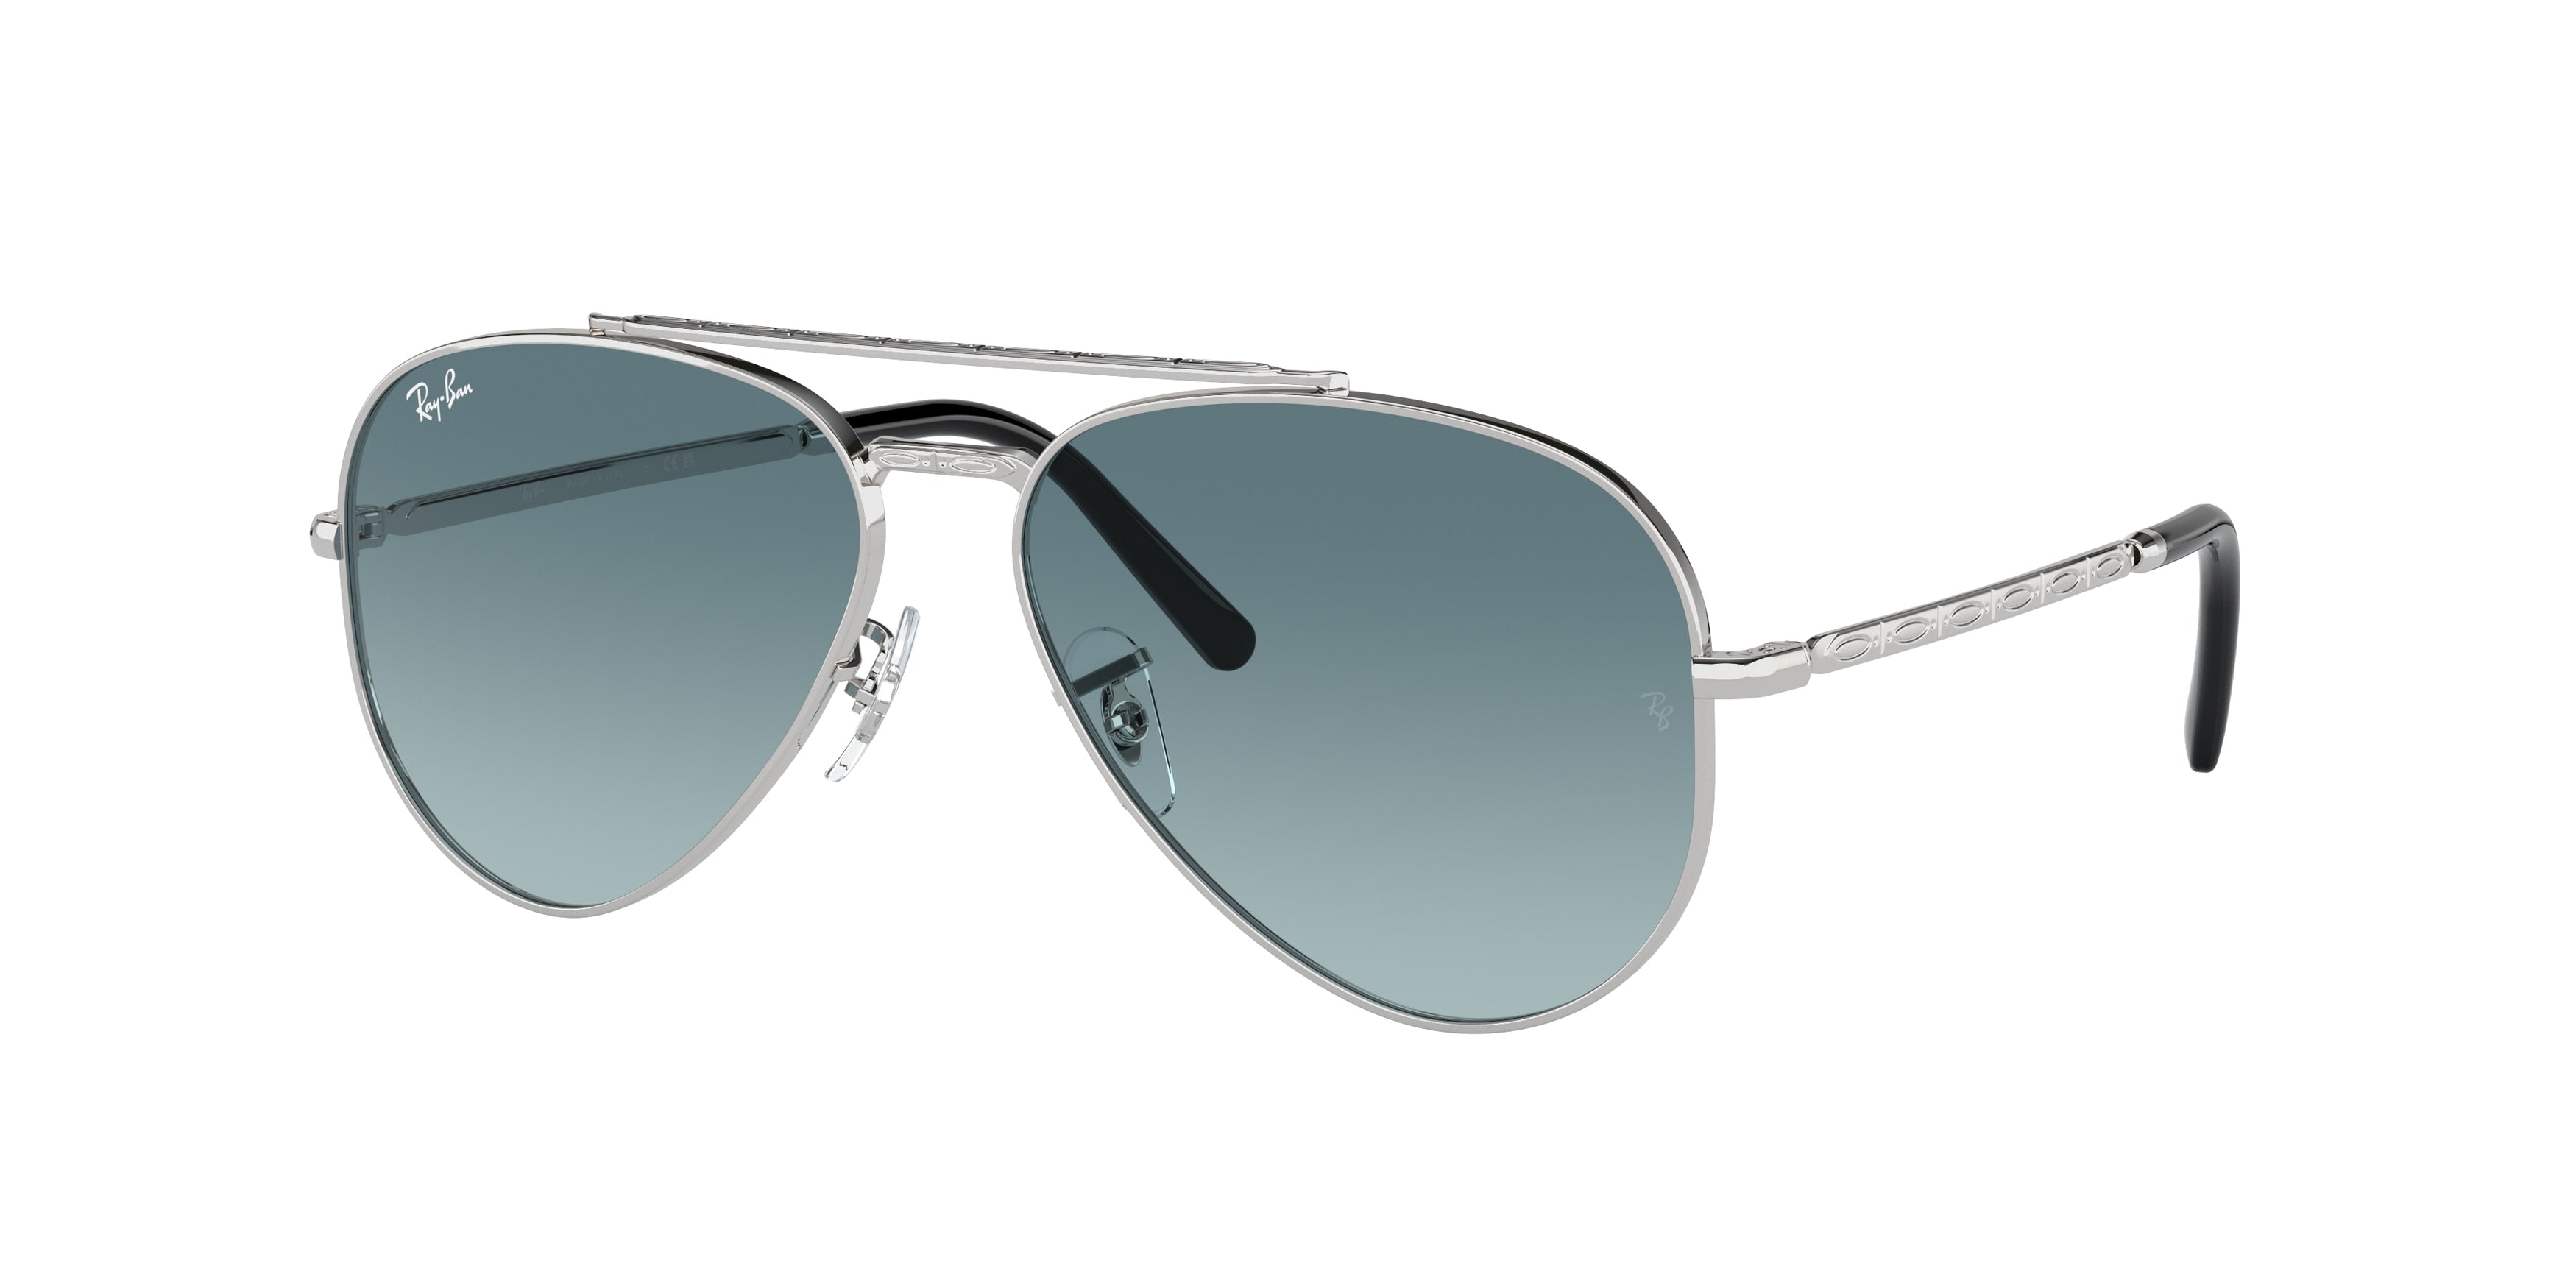 Ray-Ban NEW AVIATOR RB3625 Pilot Sunglasses  003/3M-Silver 61-140-14 - Color Map Silver